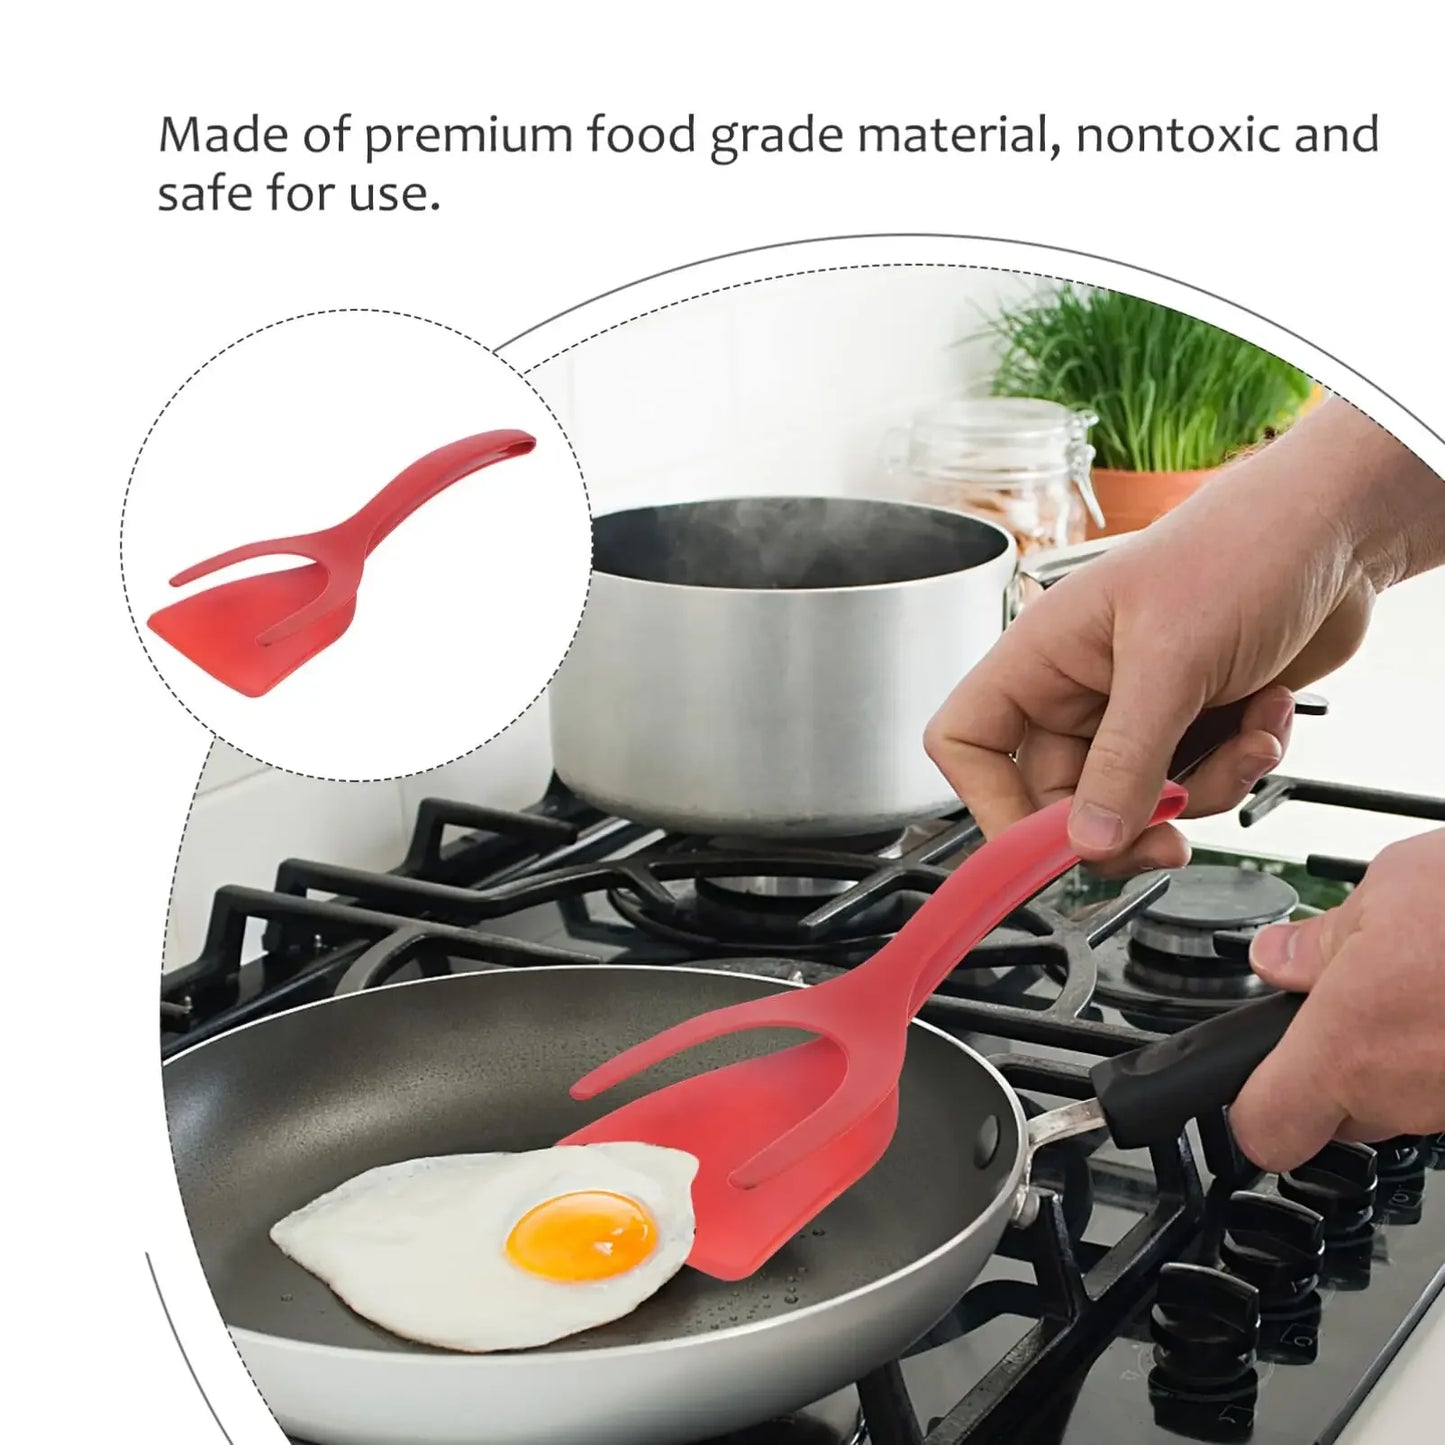 2 in 1 Grip and Flip Spatula Tongs Egg Flipper Tong Steak Spatula Tongs Clamp Pancake Fried Turners Kitchen Accessories